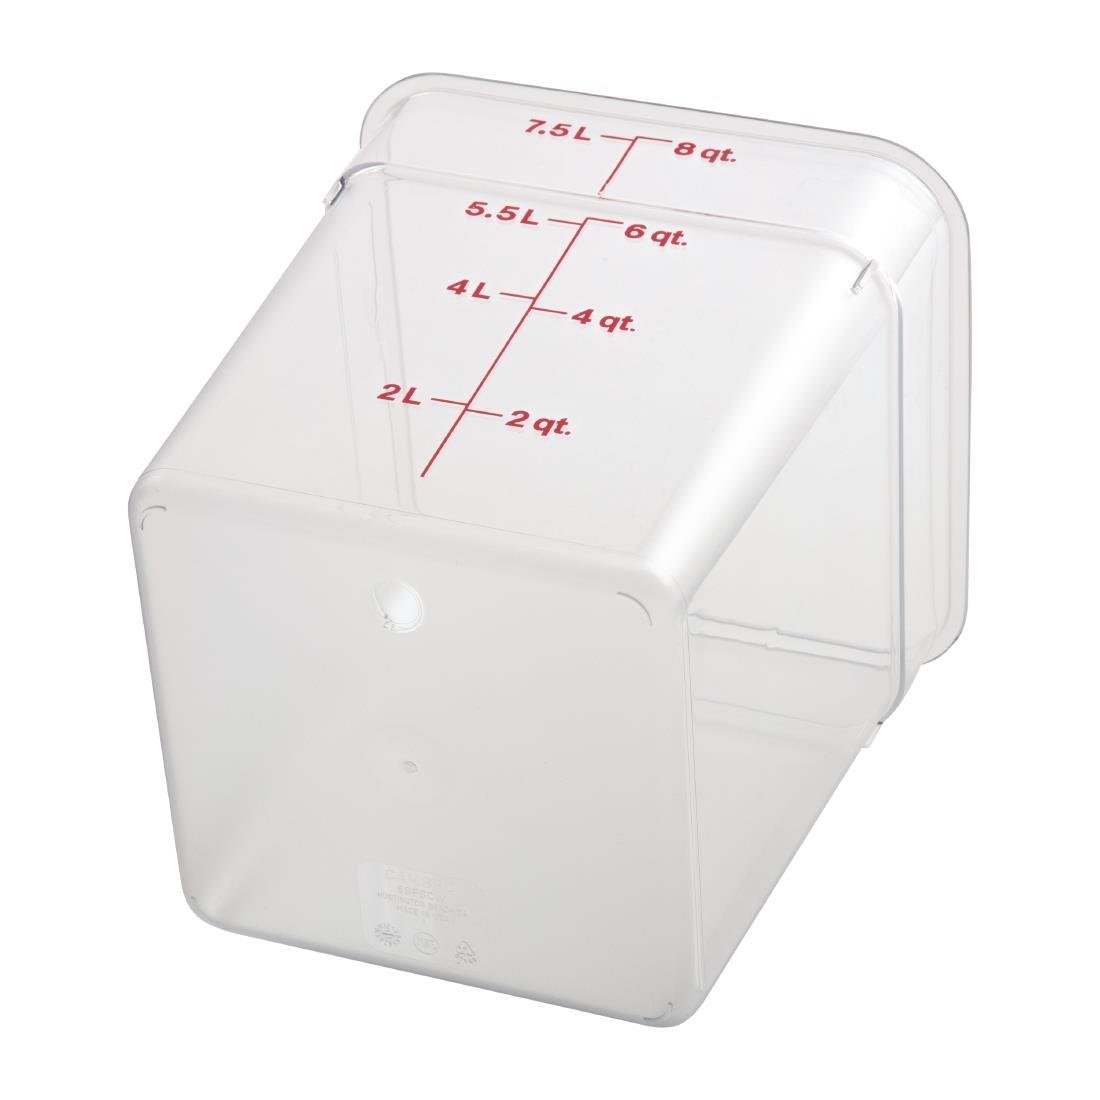 Cambro Square Polycarbonate Food Storage Container 7.6 Ltr - DB011  - 4